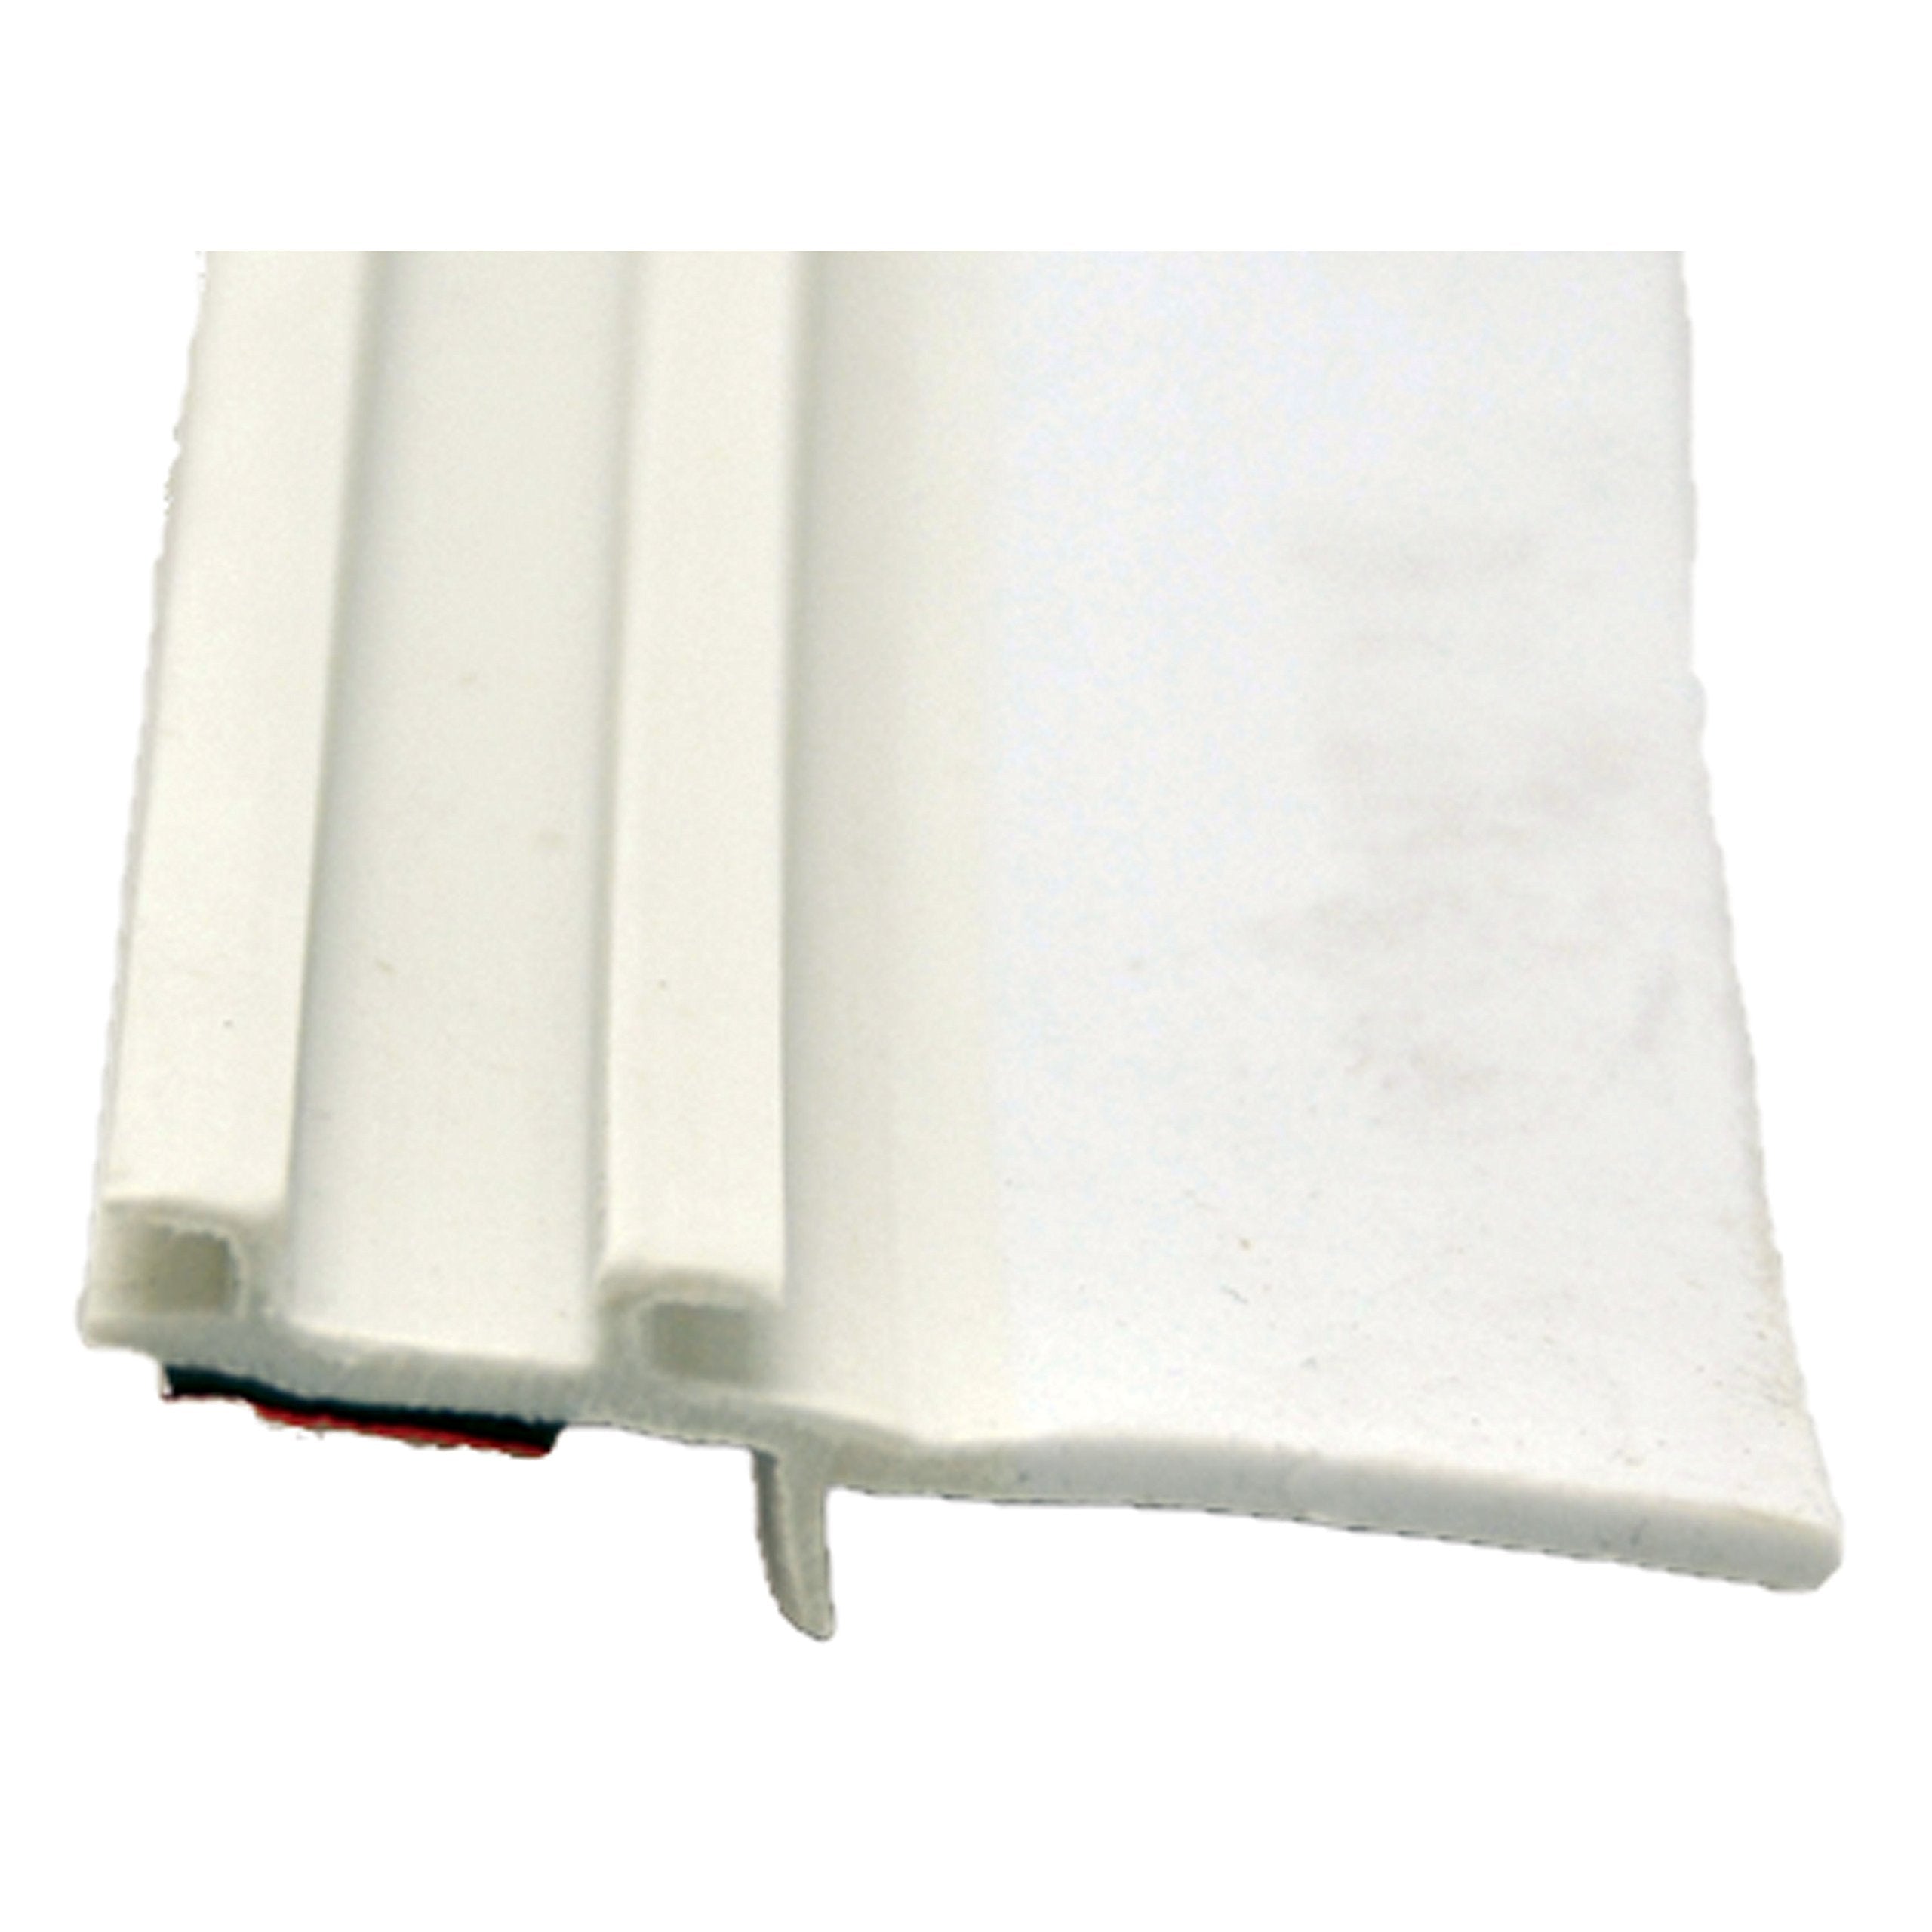 AP Products 018-317 Premium EK Seal for Slide-Out Rooms, White EK Base with 2-7/8" Wiper